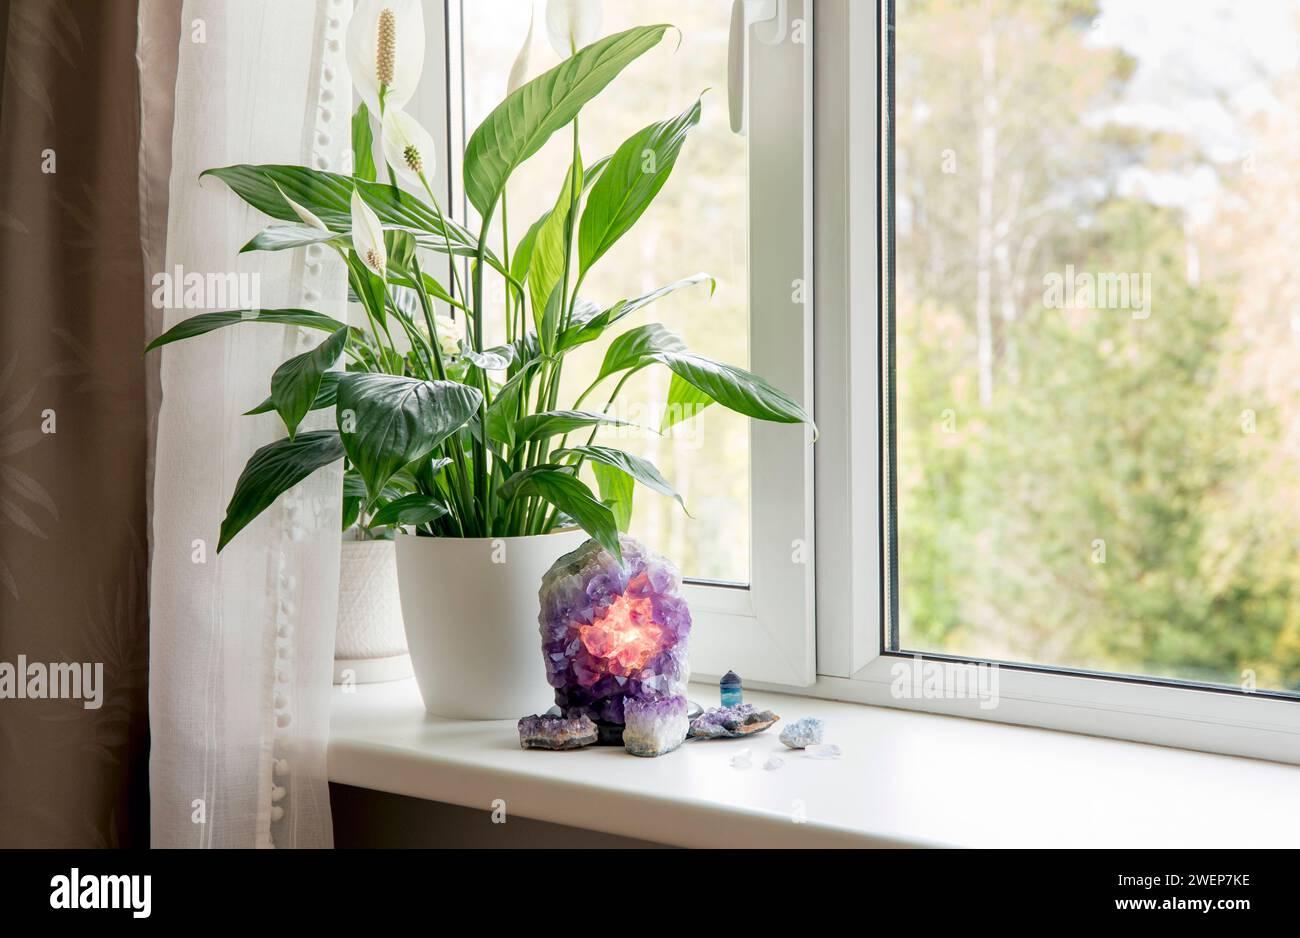 Amethyst geode lamp illuminated, spiritual calming home atmosphere. Air cleaning plant flower Spathiphyllum, spath or peace lily growing on window. Stock Photo